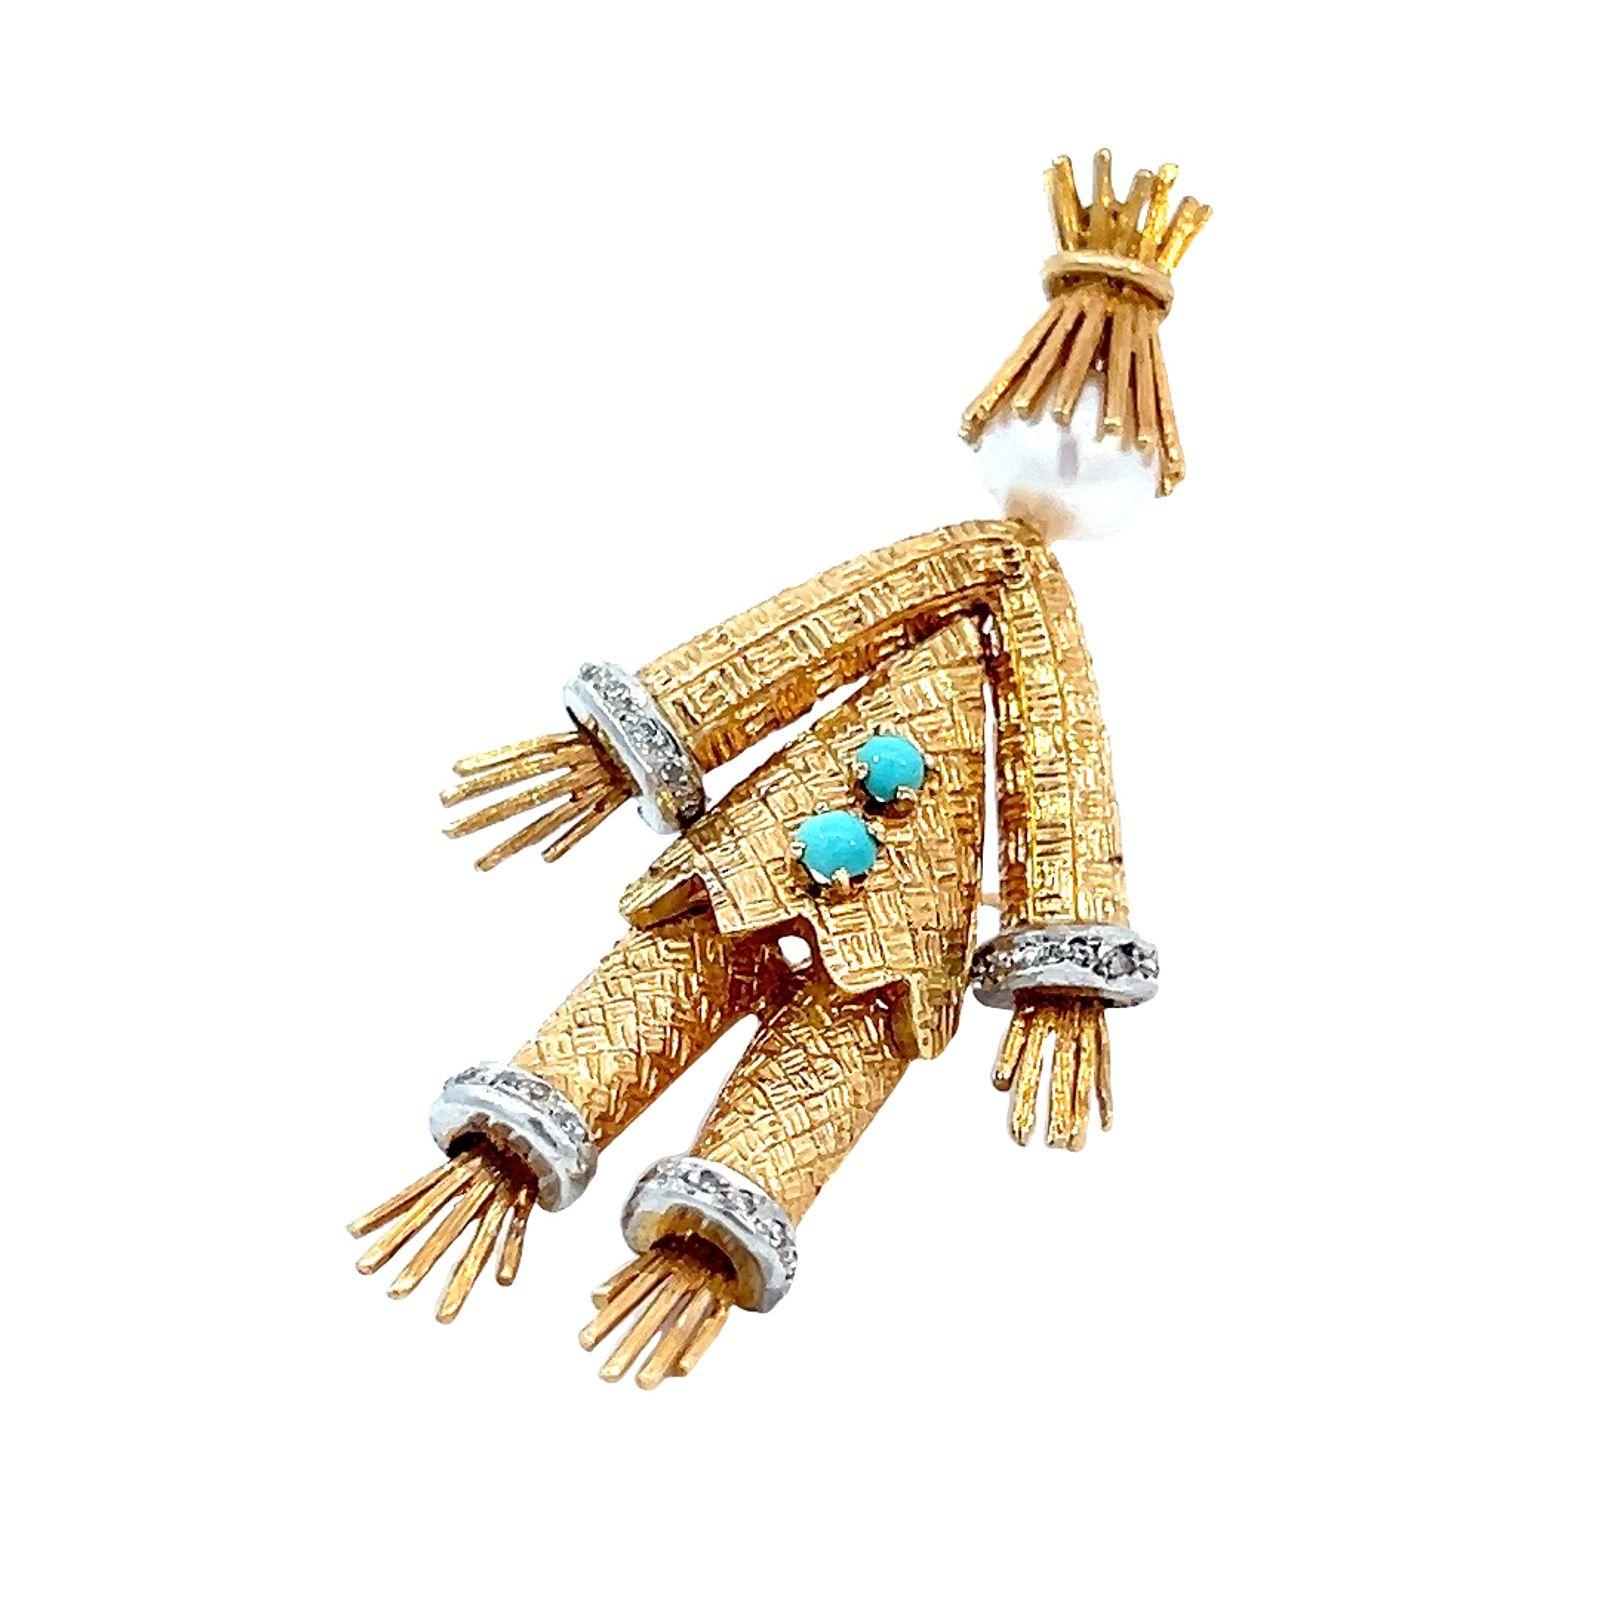 Cherny cultured pearl, diamond, and 18-karat scarecrow brooch. The scarecrow is wearing a textured gold suit with diamond cuffs on the jacket's arms and pant legs. The scarecrow has textured gold, made to look like straw, for the hands, feet, and